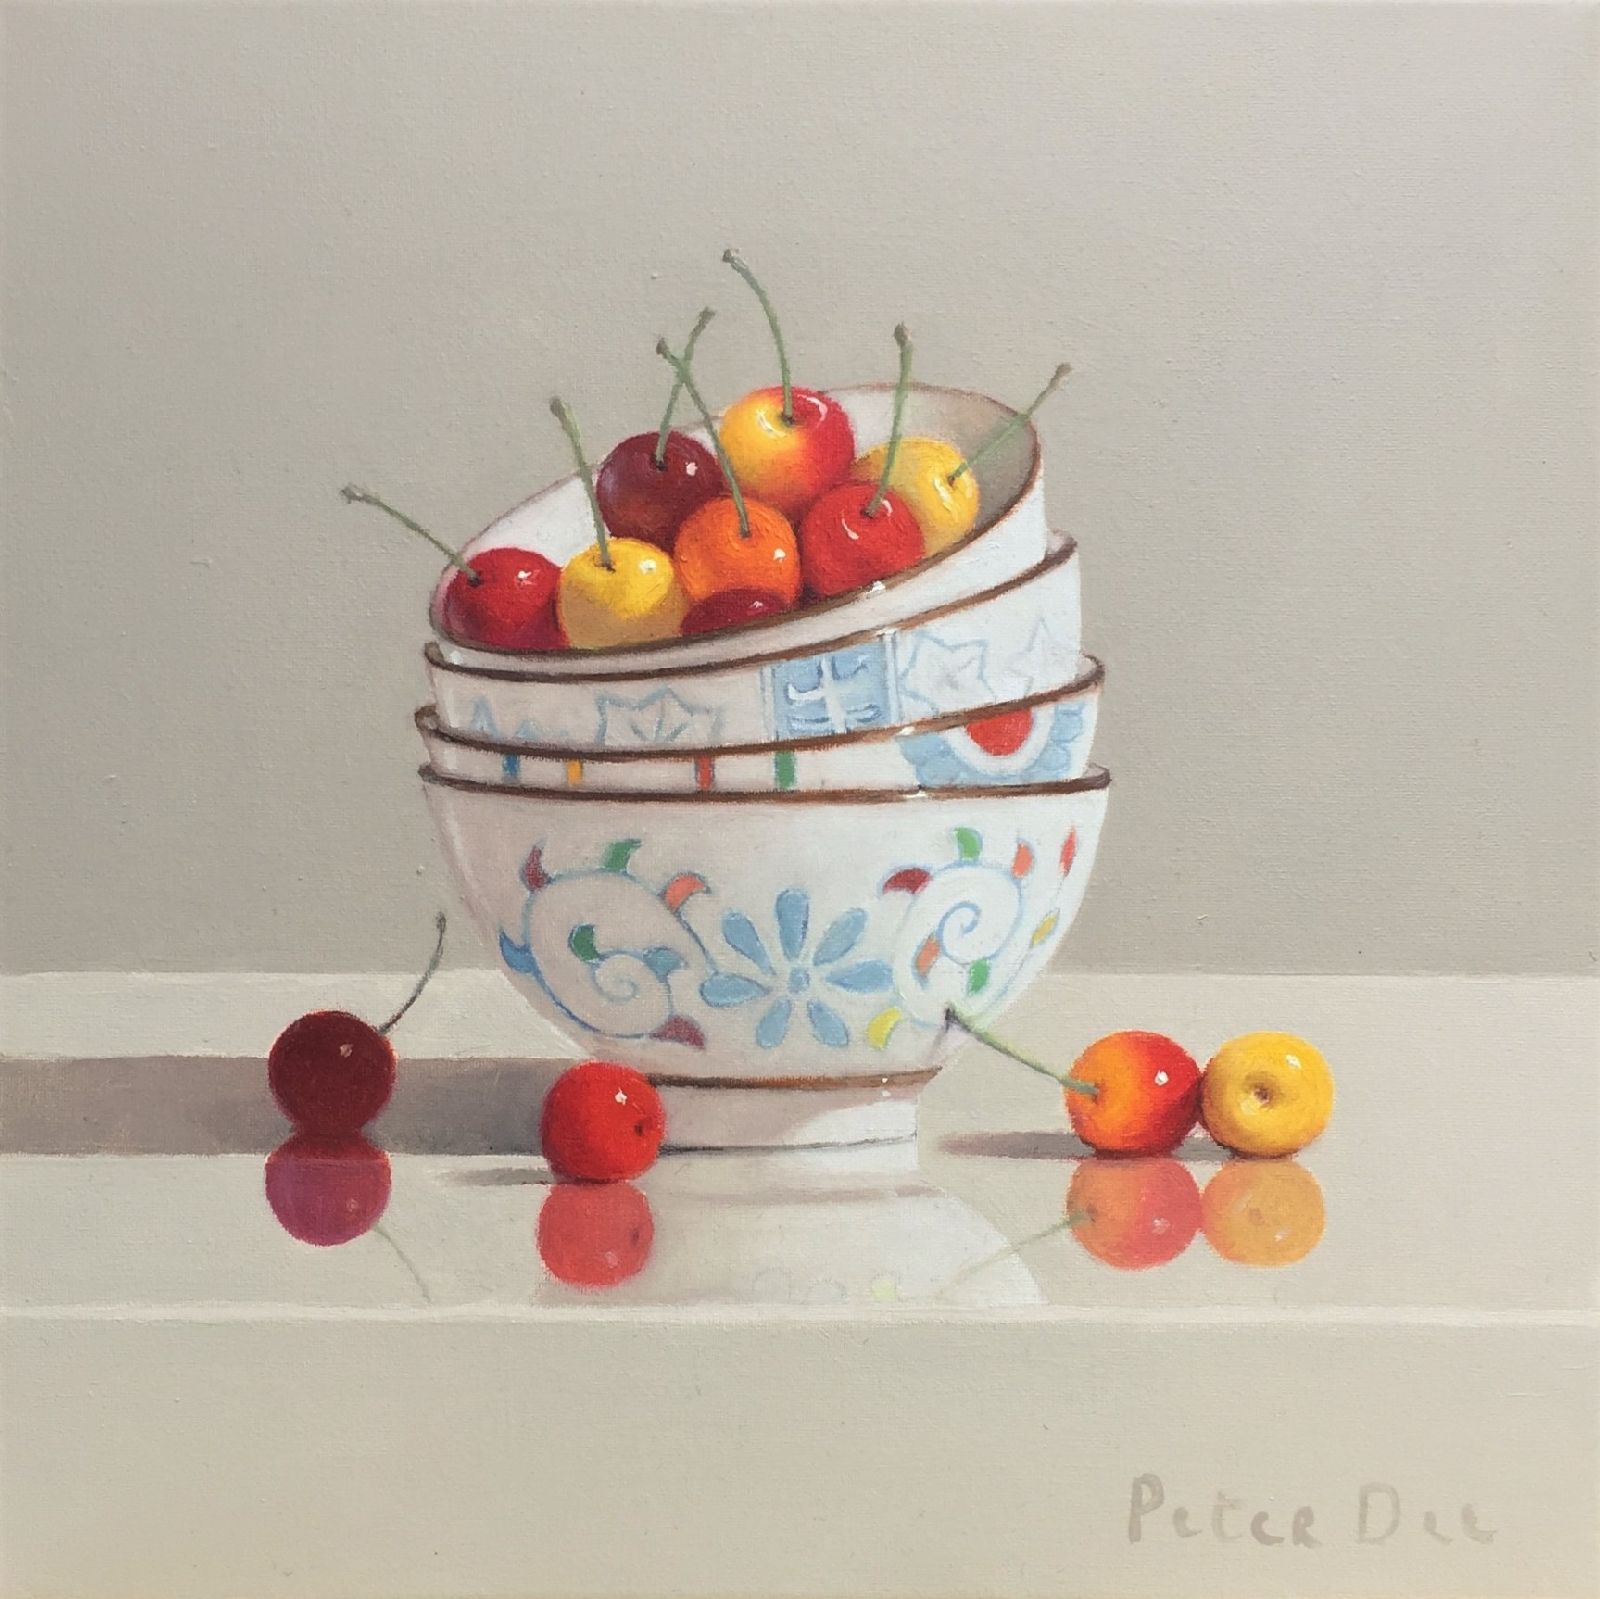 Stacked Bowls with Cherries by Peter Dee